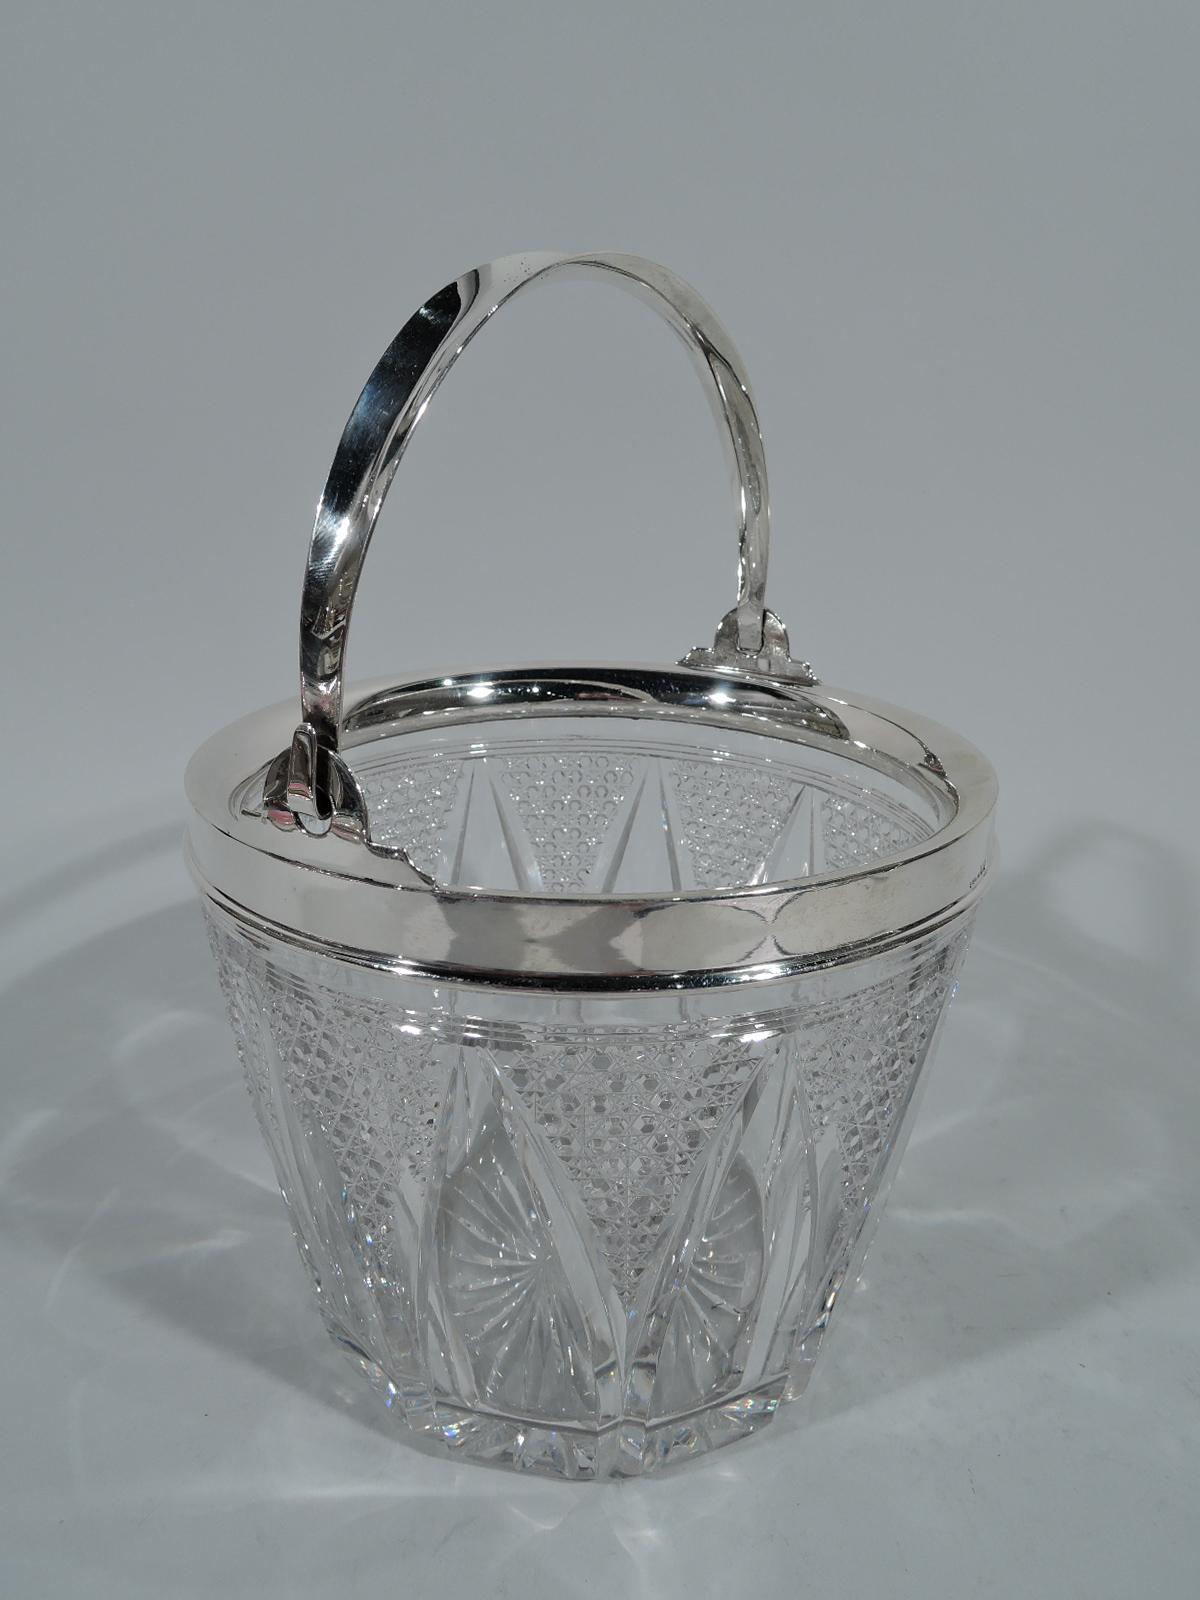 Turn-of-the-century cut glass and sterling silver ice bucket. Made by Wilcox Silver Plate Co. (a division of International) in Meriden, Conn. Round clear glass with band of stylized leaves, and diaper triangles with facets and starts. Sterling